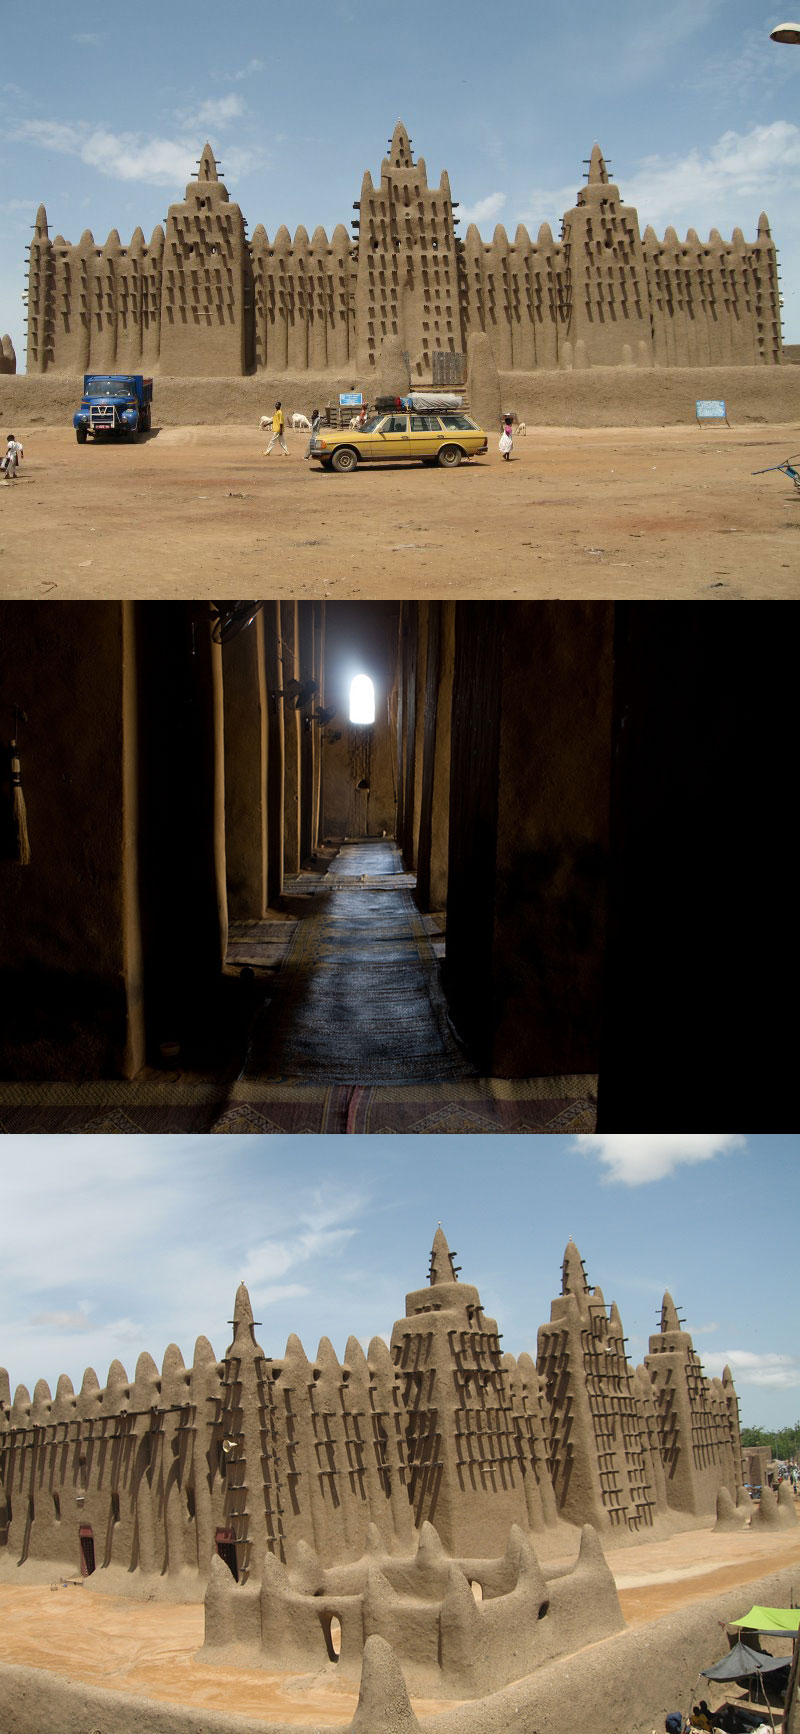 Fact: The mosque in Djenne, Mali is one of the largest earthen buildings in the world